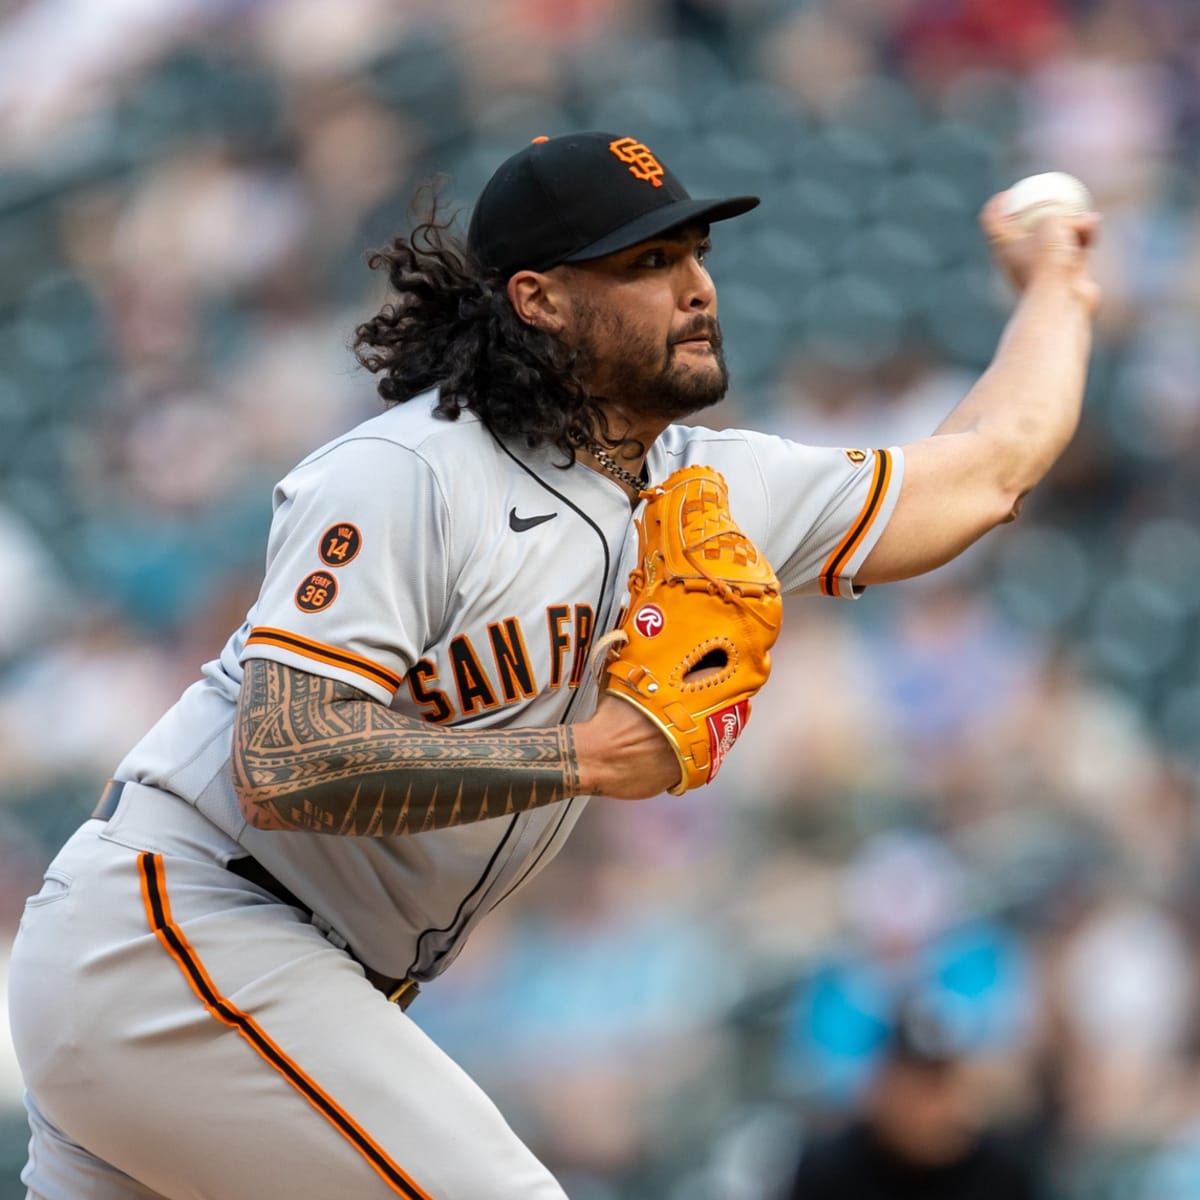 San Francisco Giants Pitcher Does Something Not Done in Baseball